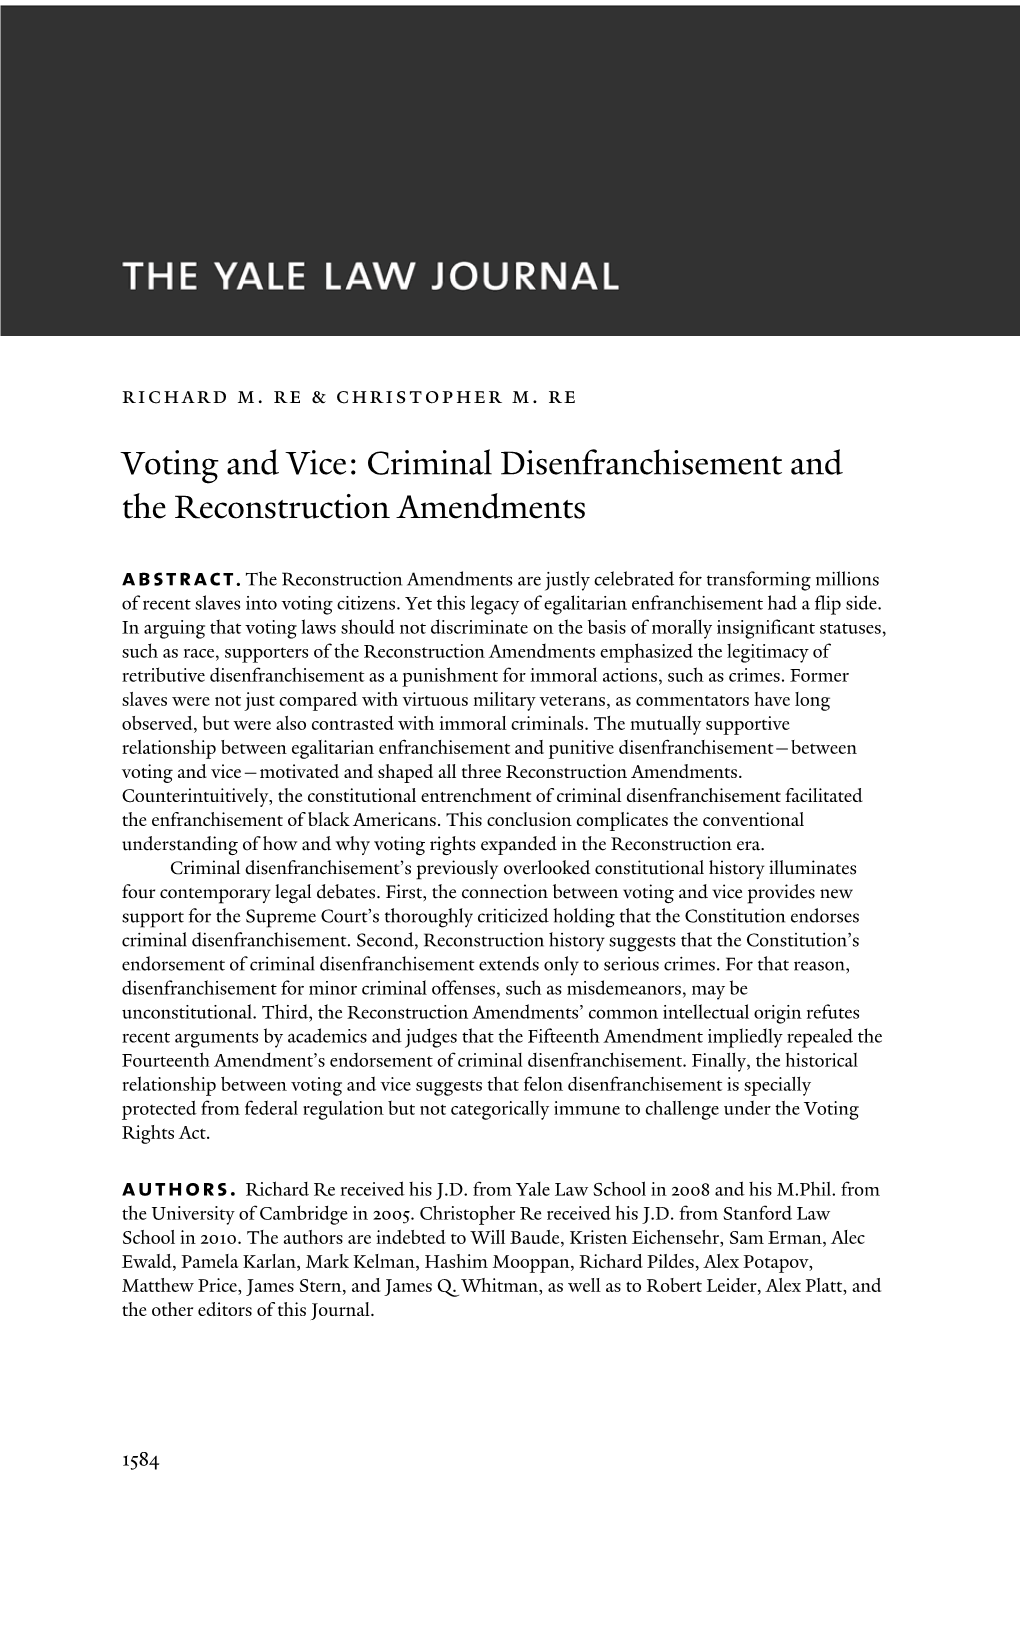 Voting and Vice: Criminal Disenfranchisement and the Reconstruction Amendments Abstract